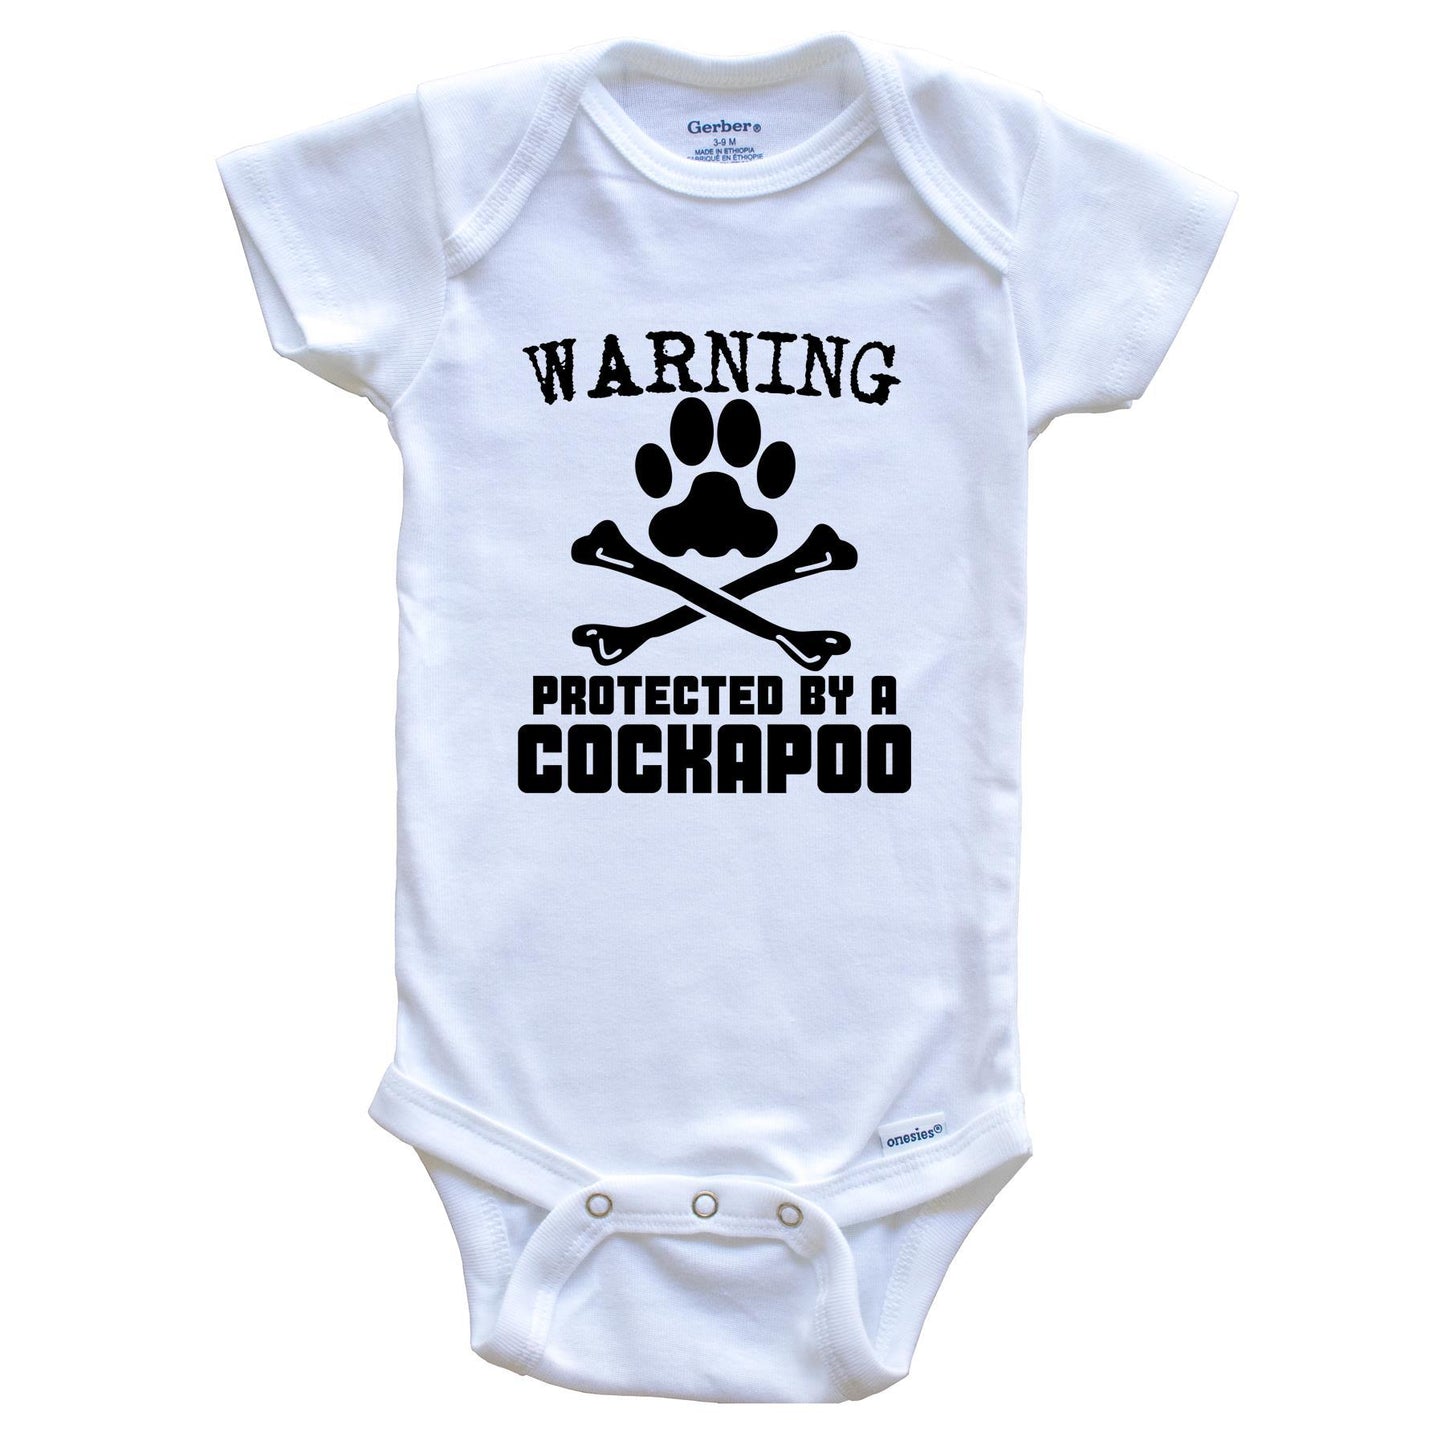 Warning Protected By A Cockapoo Funny Baby Onesie